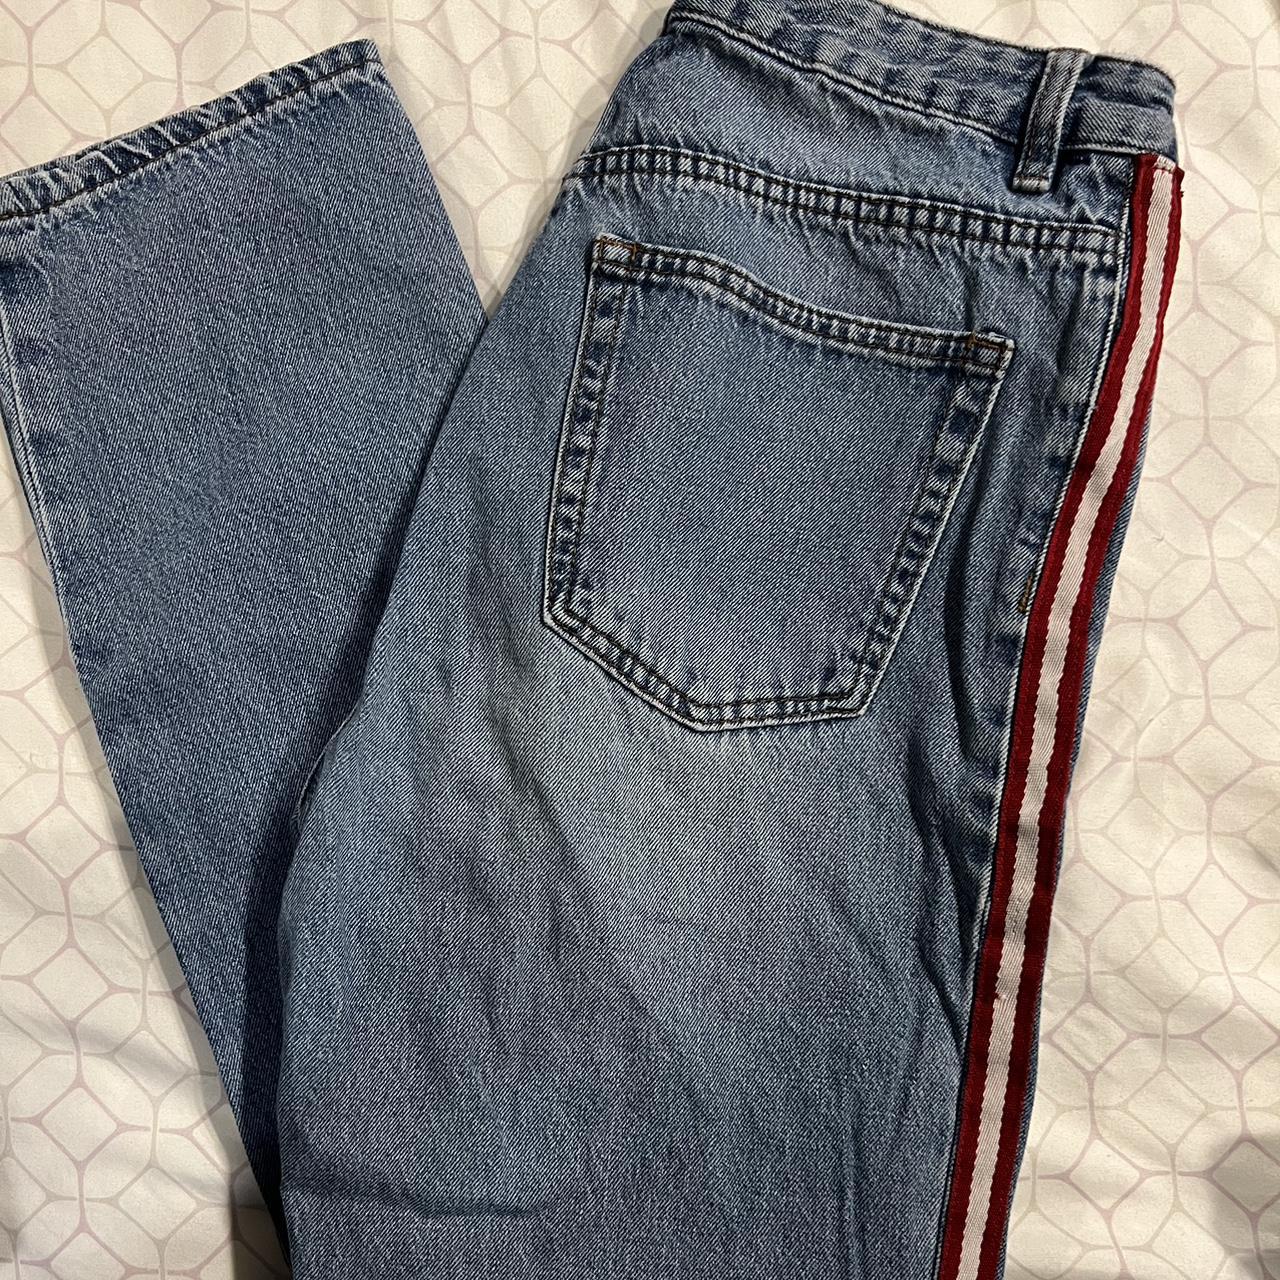 jeans with Red stripes in side Size 5 - Depop